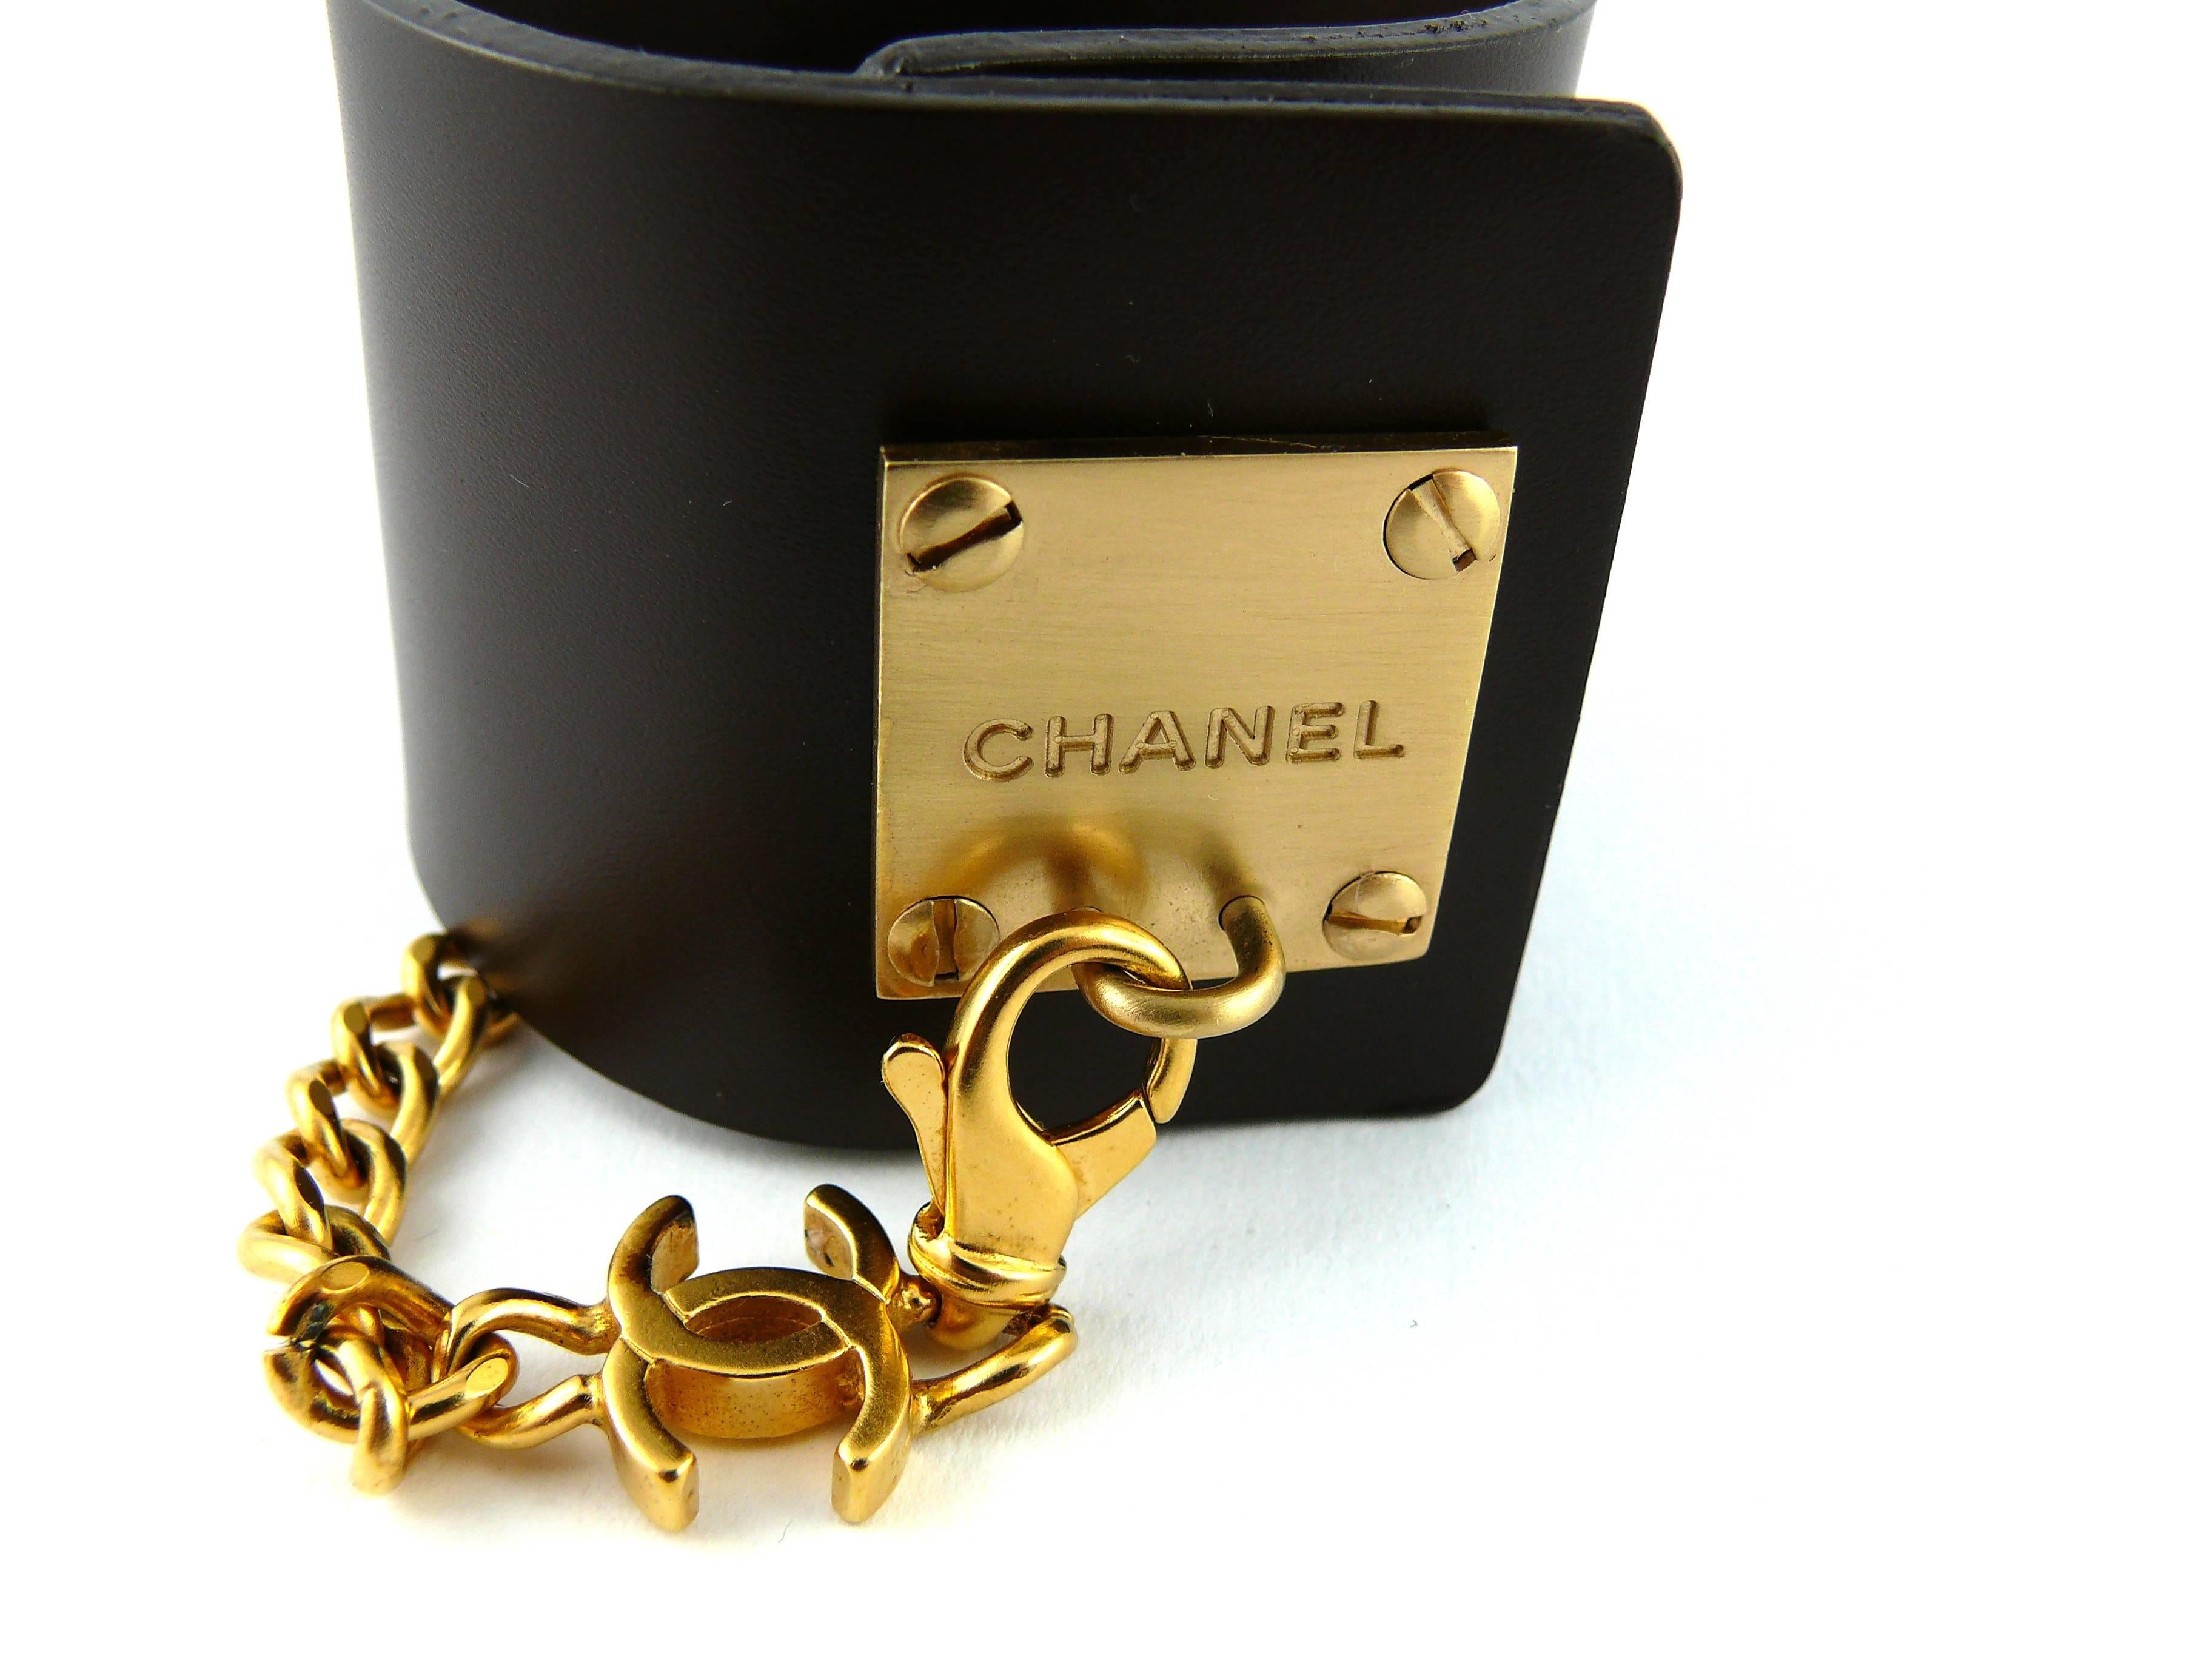 CHANEL gorgeous brown leather cuff bracelet featuring a gold tone ID tag plaque embossed with Chanel logo.

Bracelet is adorned with a chain and CC monogram.

Marked Chanel 03 P Made in France.

Comes with its original box